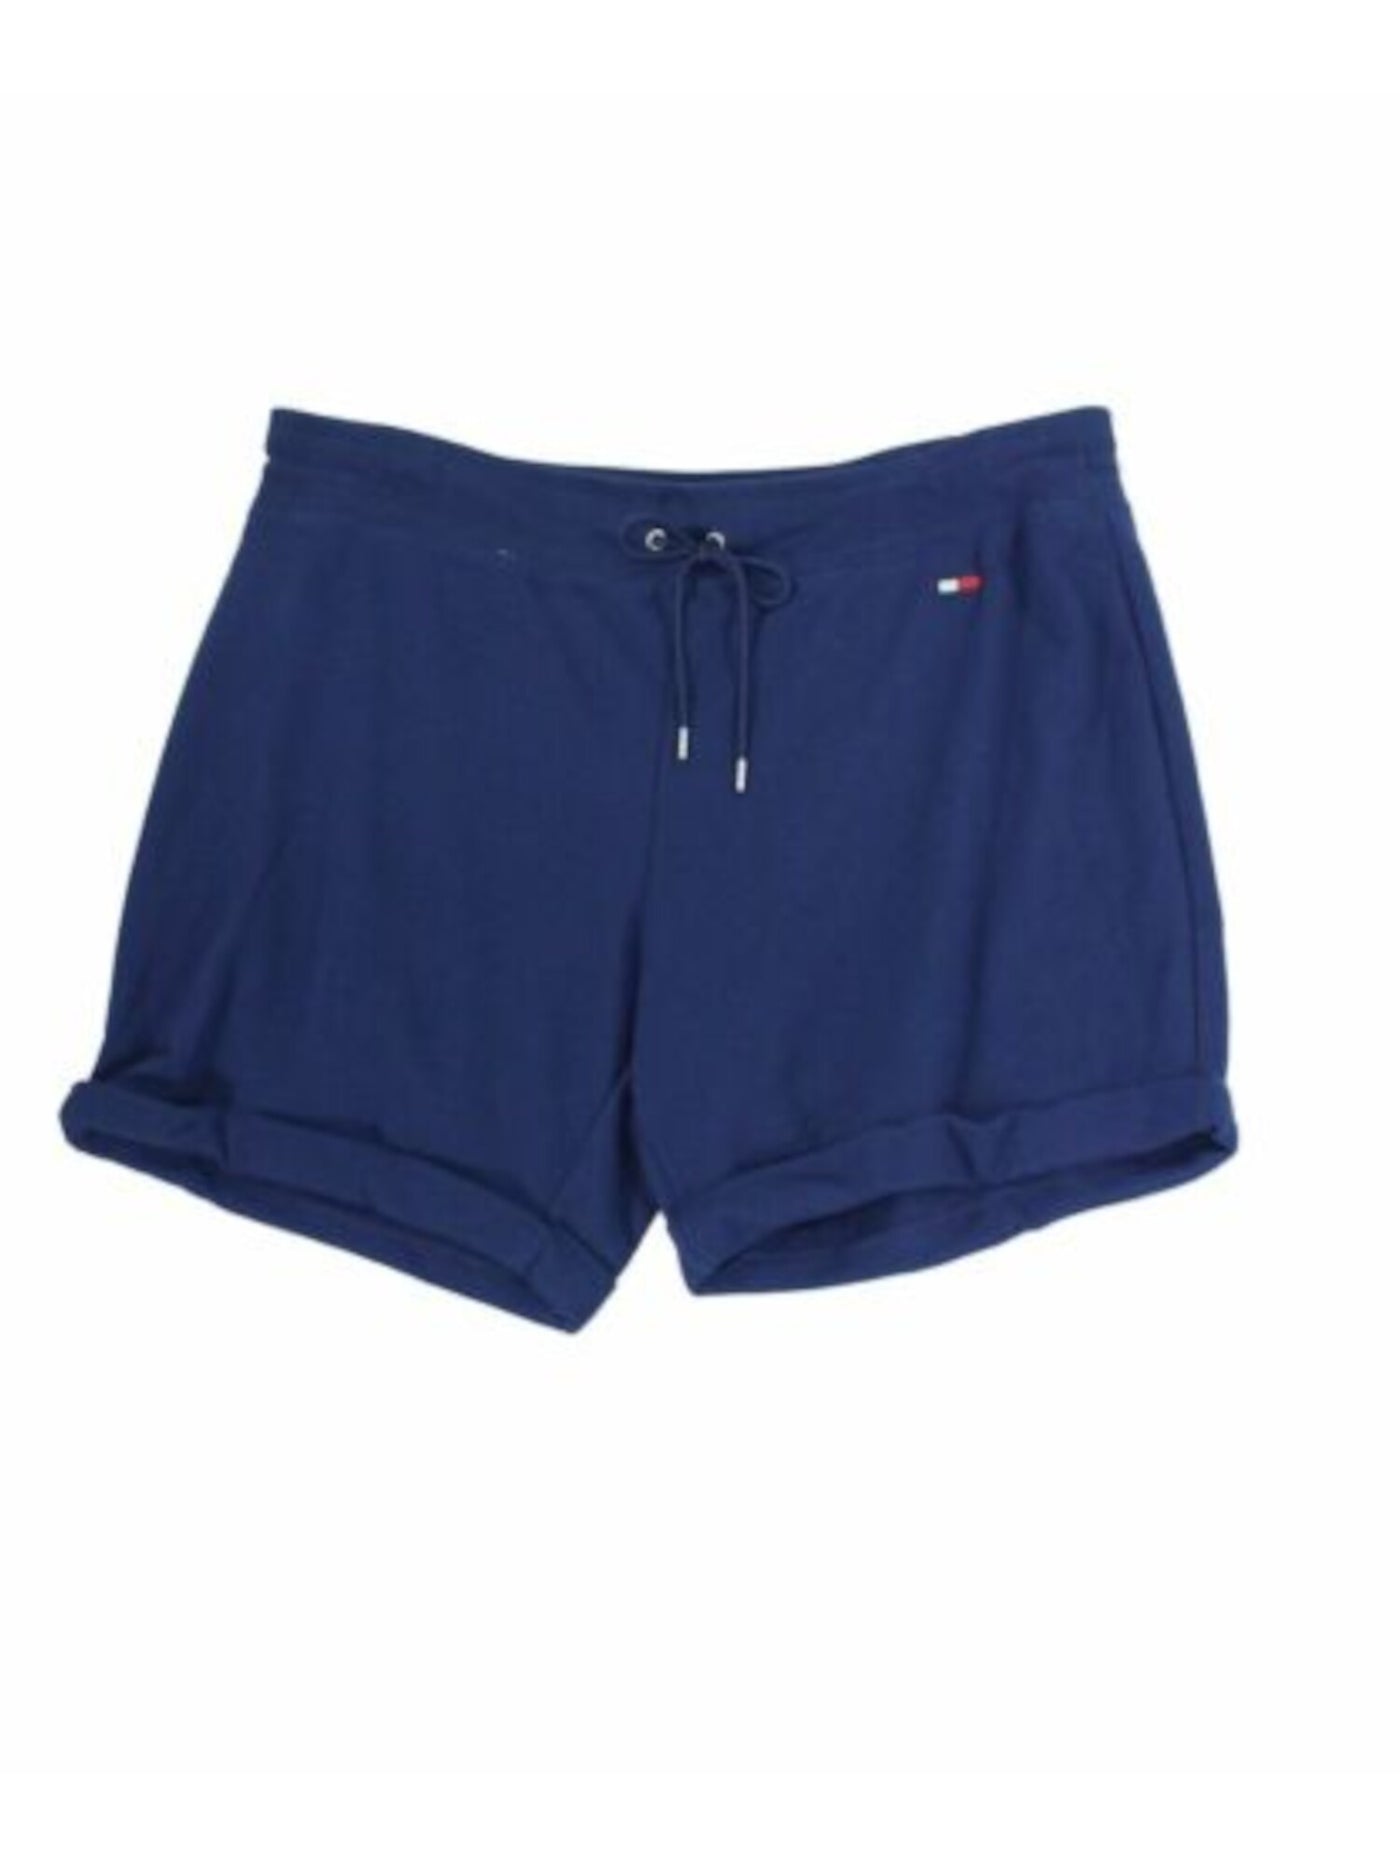 TOMMY HILFIGER Womens Navy Active Wear Cuffed Shorts Plus 0X